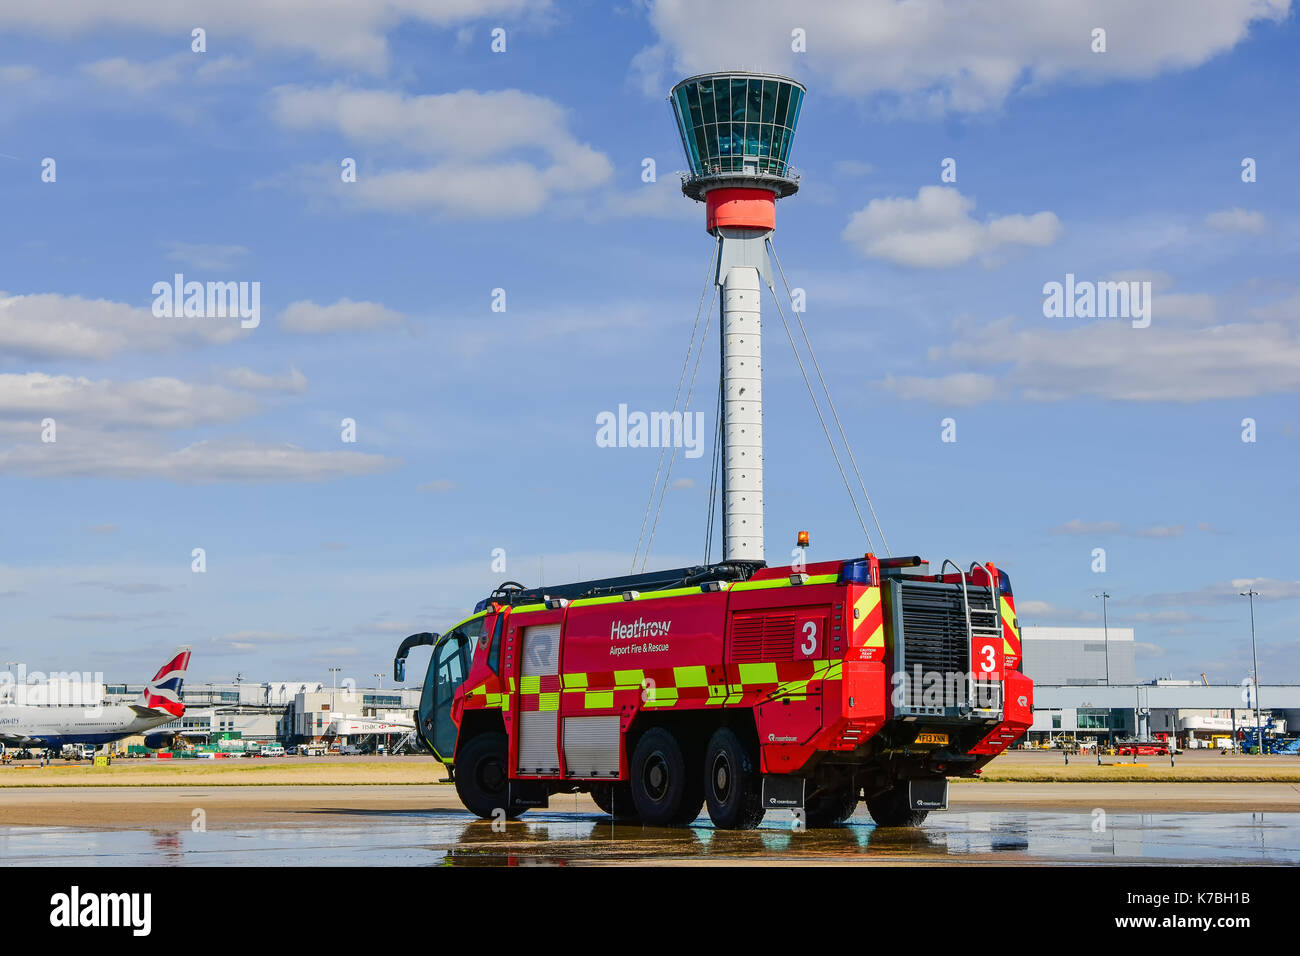 London Heathrow Airport Emergency Fire Truck  Next to the Air Traffic Control Tower Stock Photo